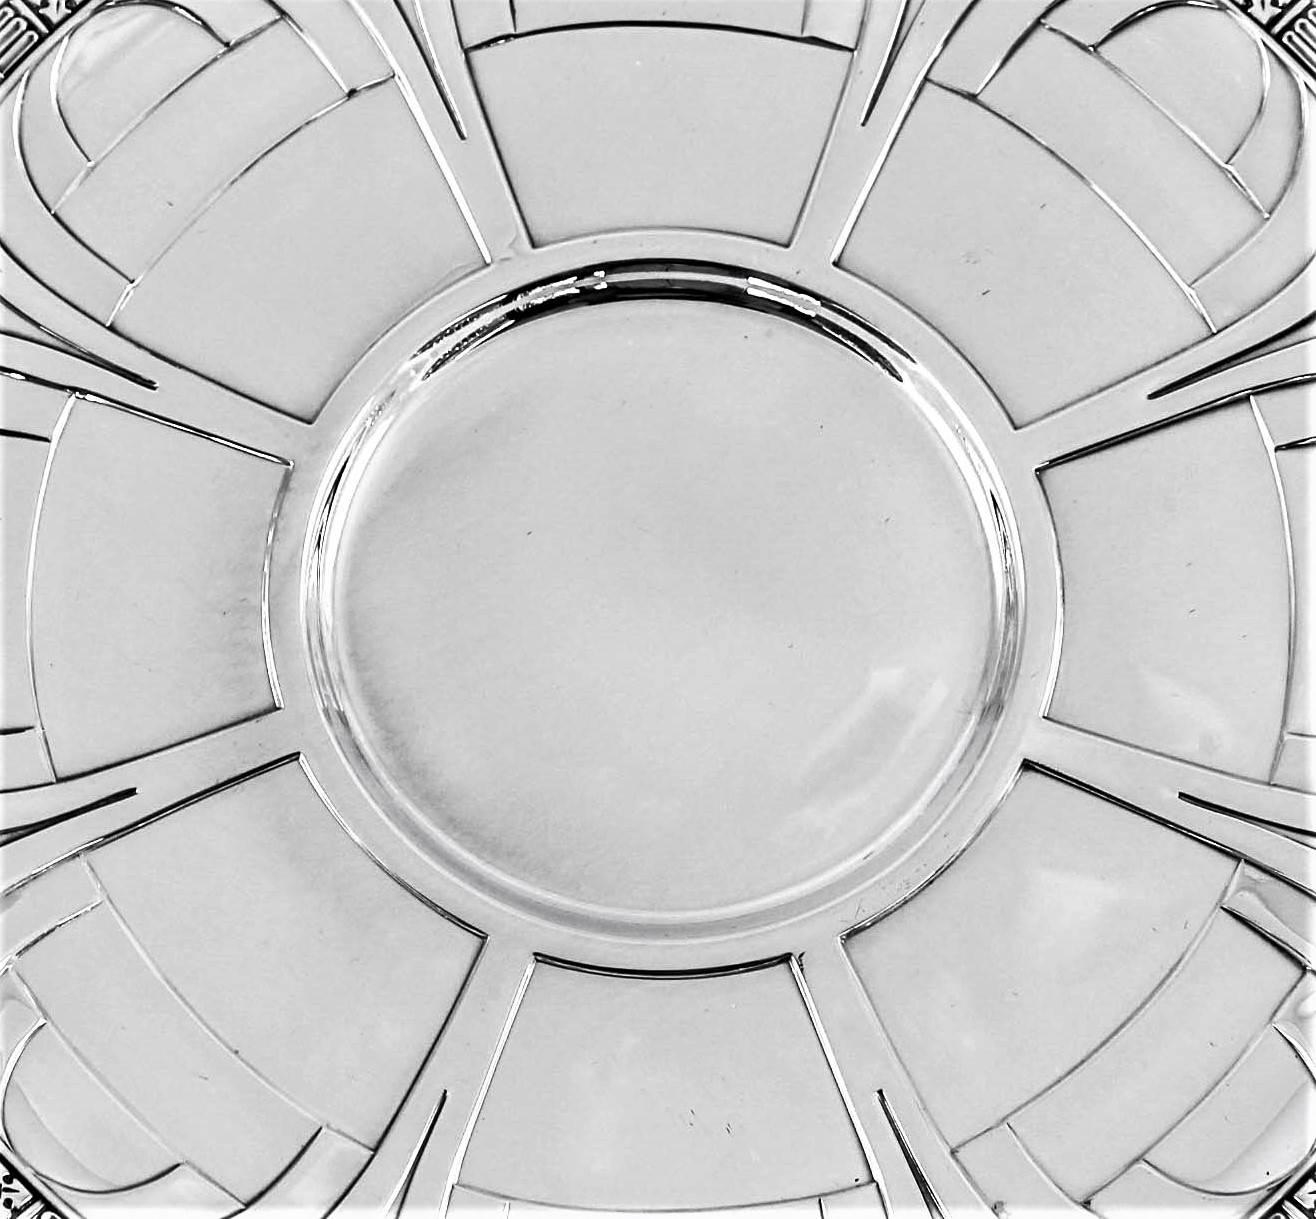 Think F. Scott Fitzgerald, Chrysler Building and Big Band, it was the roaring 1920s and Art Deco was at its height. Here’s a piece of Americana from that glorious period; this fabulous dish. The design screams Art Deco! With its symmetrical lines